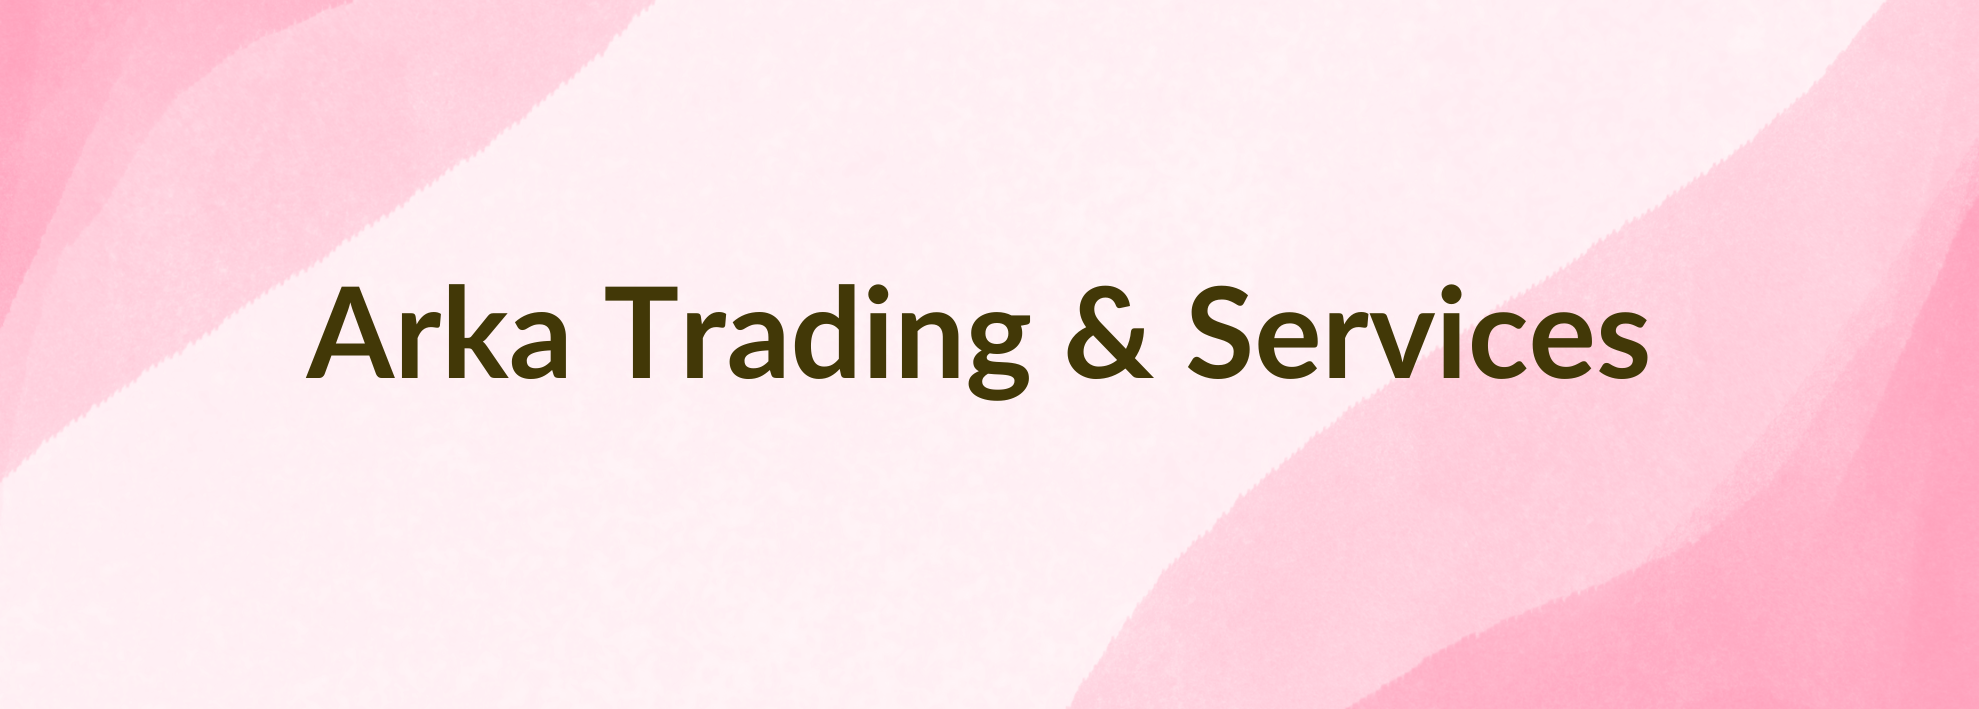  Arka Trading & Services